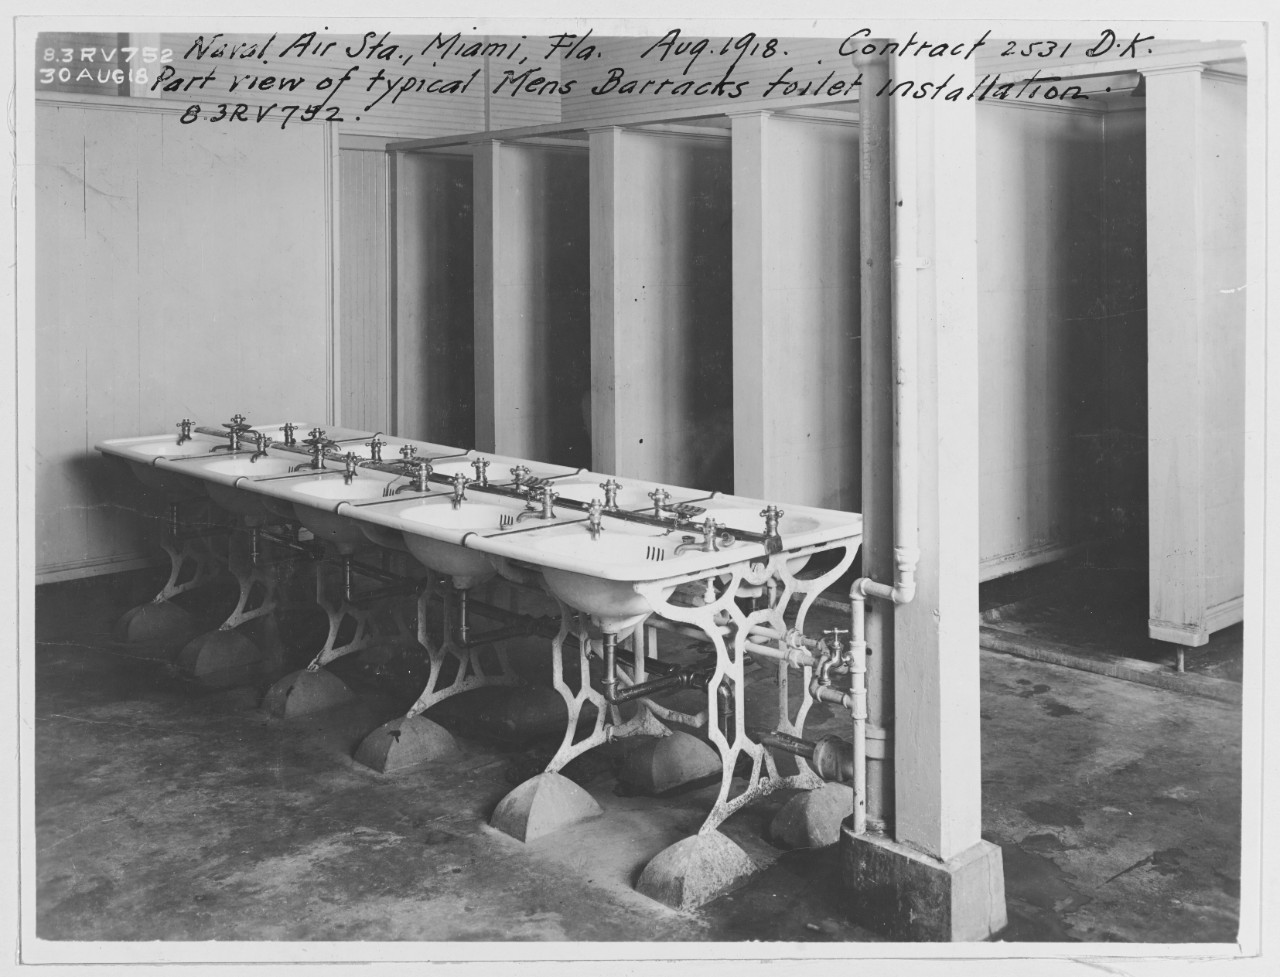 Part view of typical Men's Barracks toilet installation. Naval Air Station Miami.